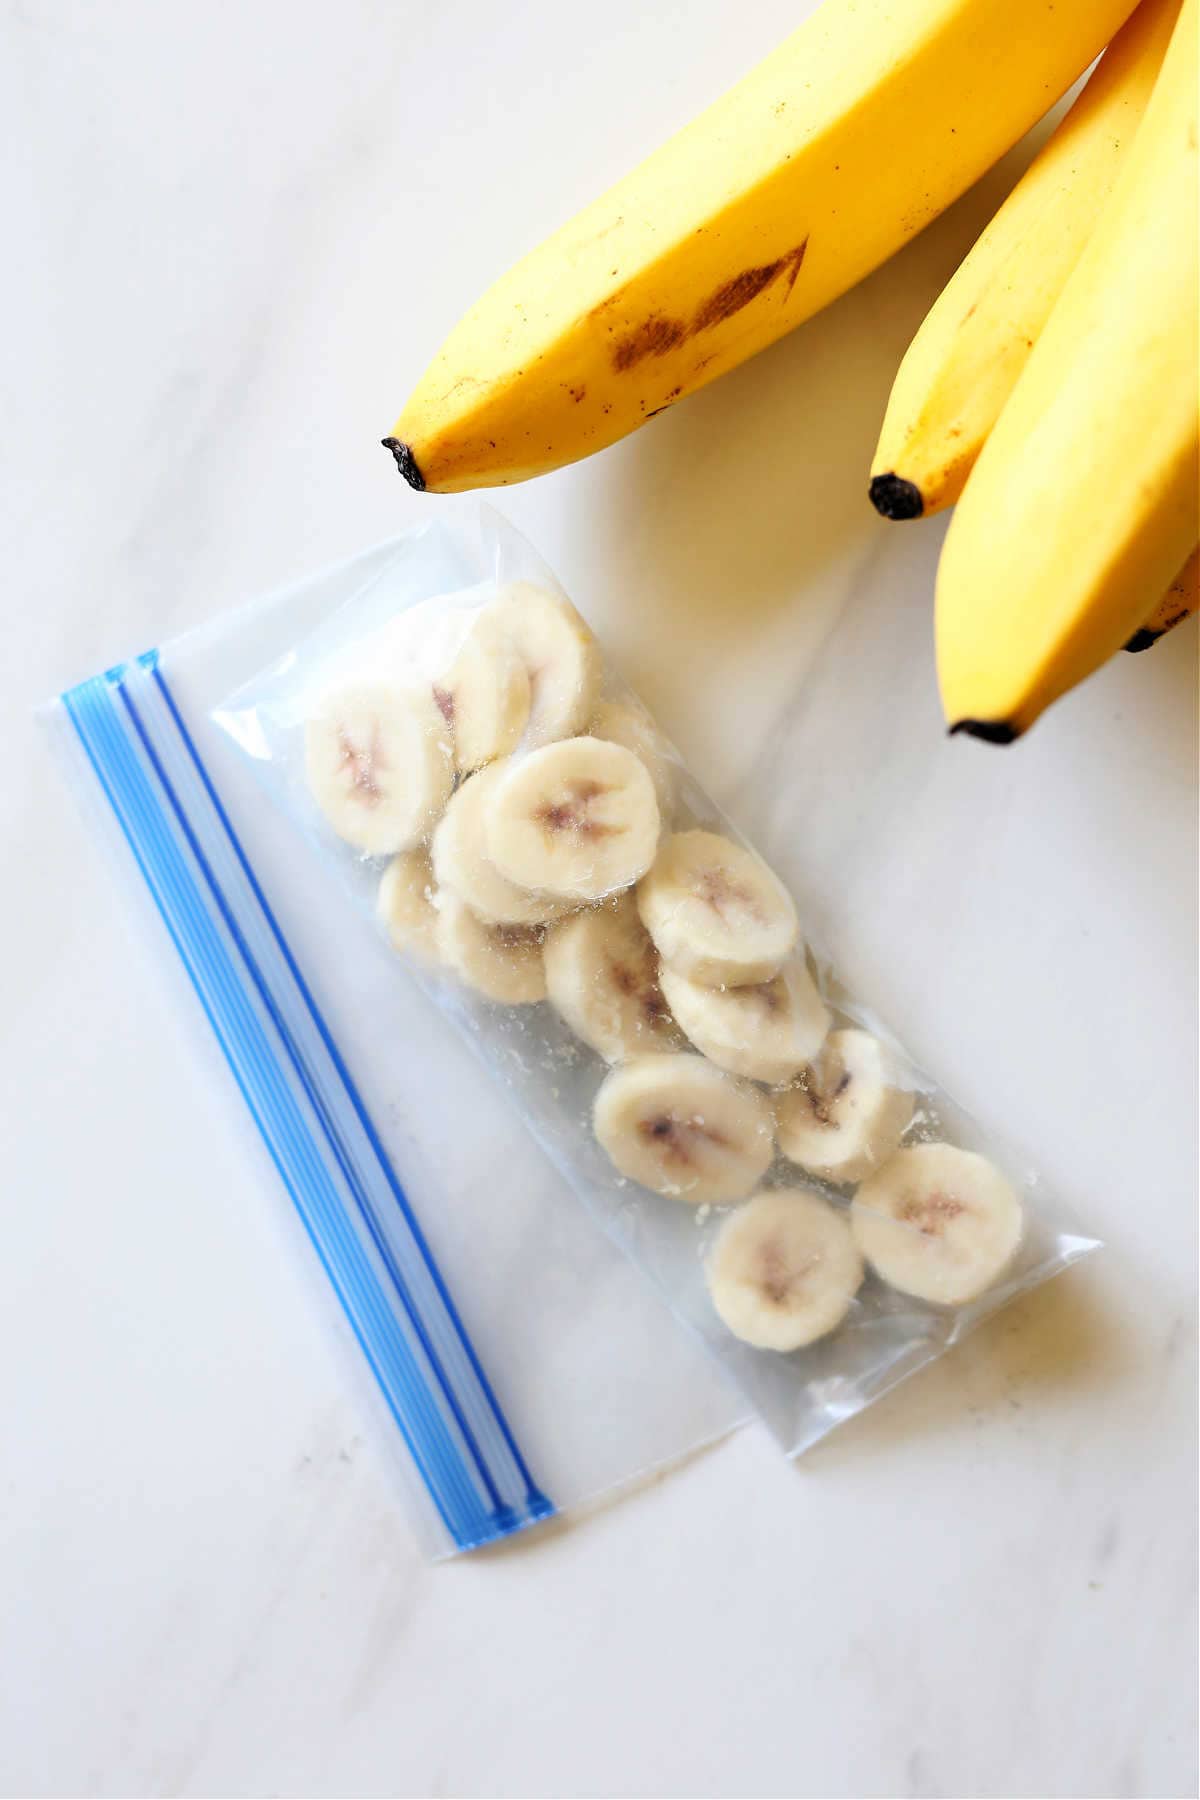 step by step instructions how to freeze bananas and frozen bananas in a bag